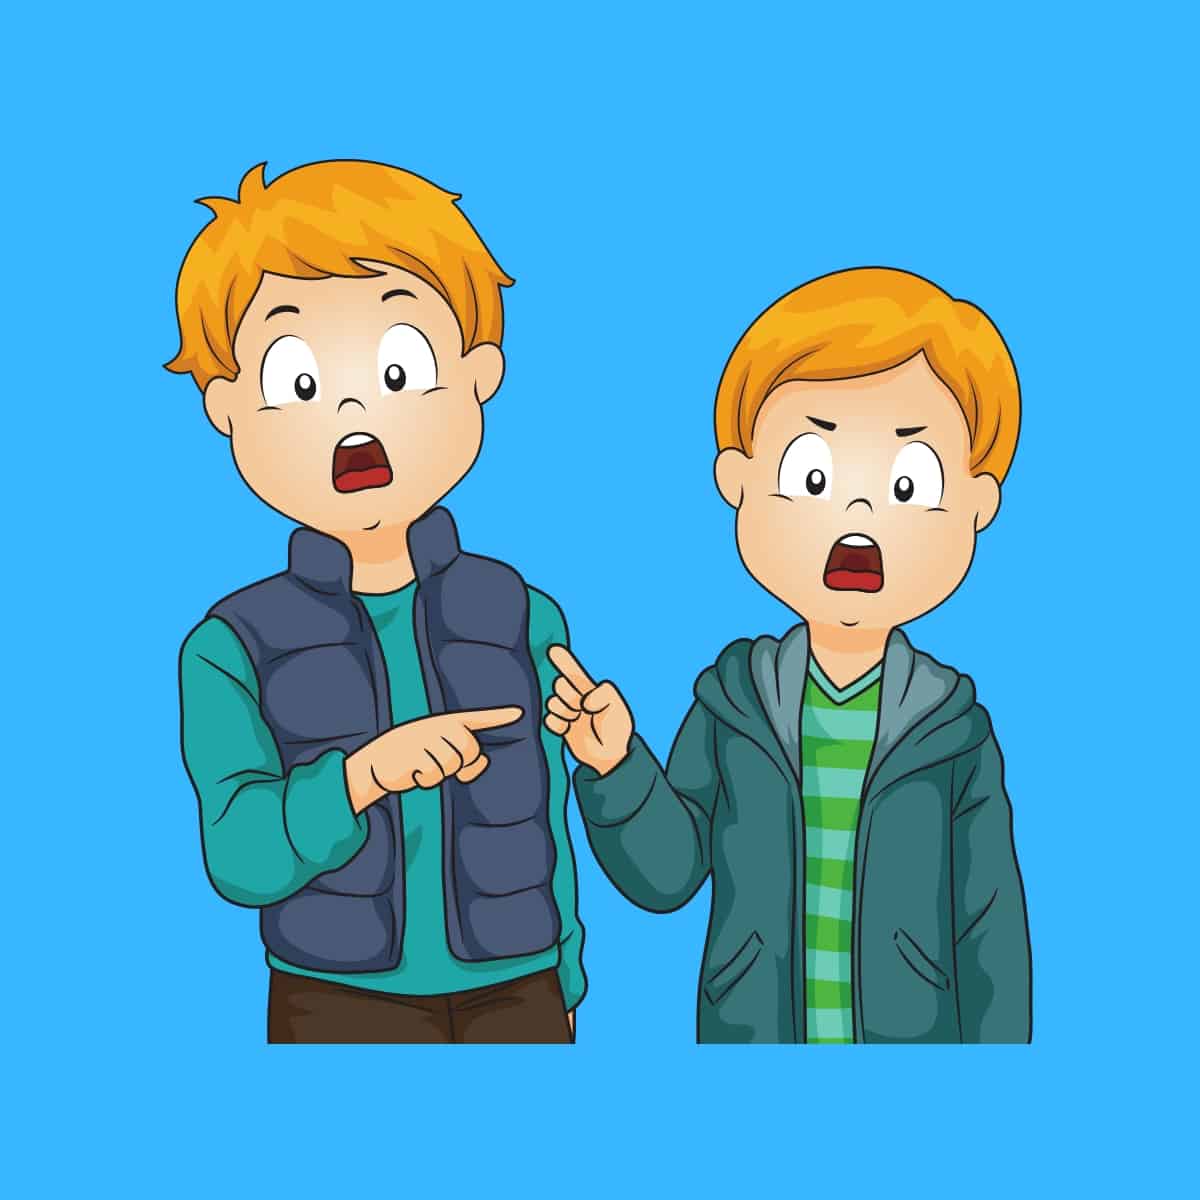 Cartoon graphic of two brothers pointing at each other arguing on a blue background.